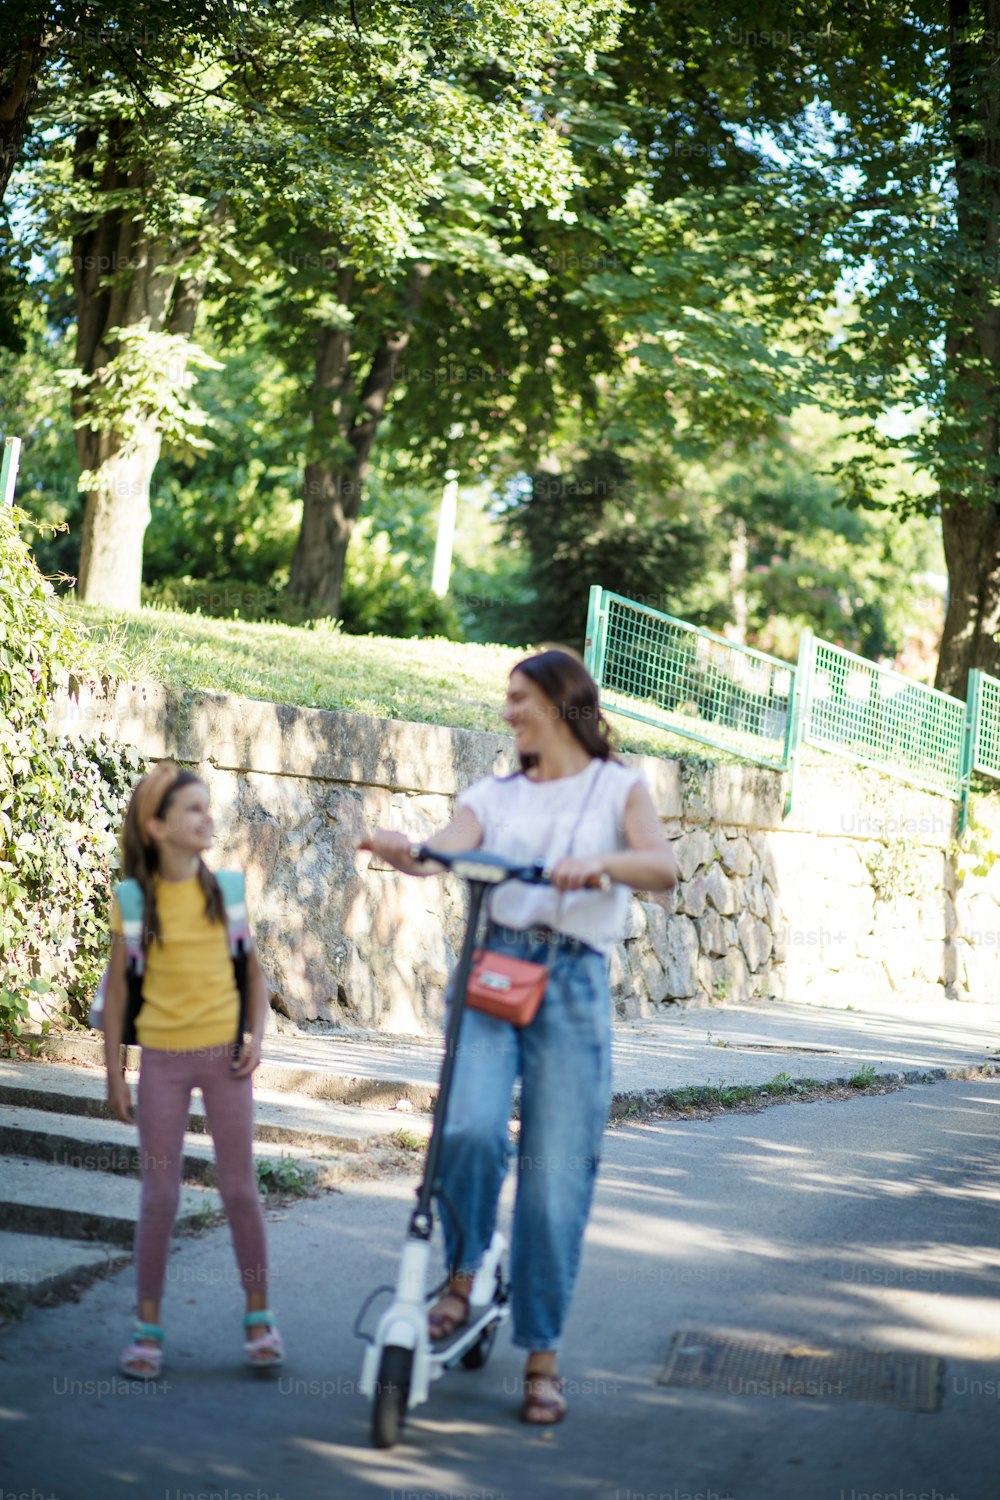 Mother and daughter walking trough park. Woman driving push scooter.